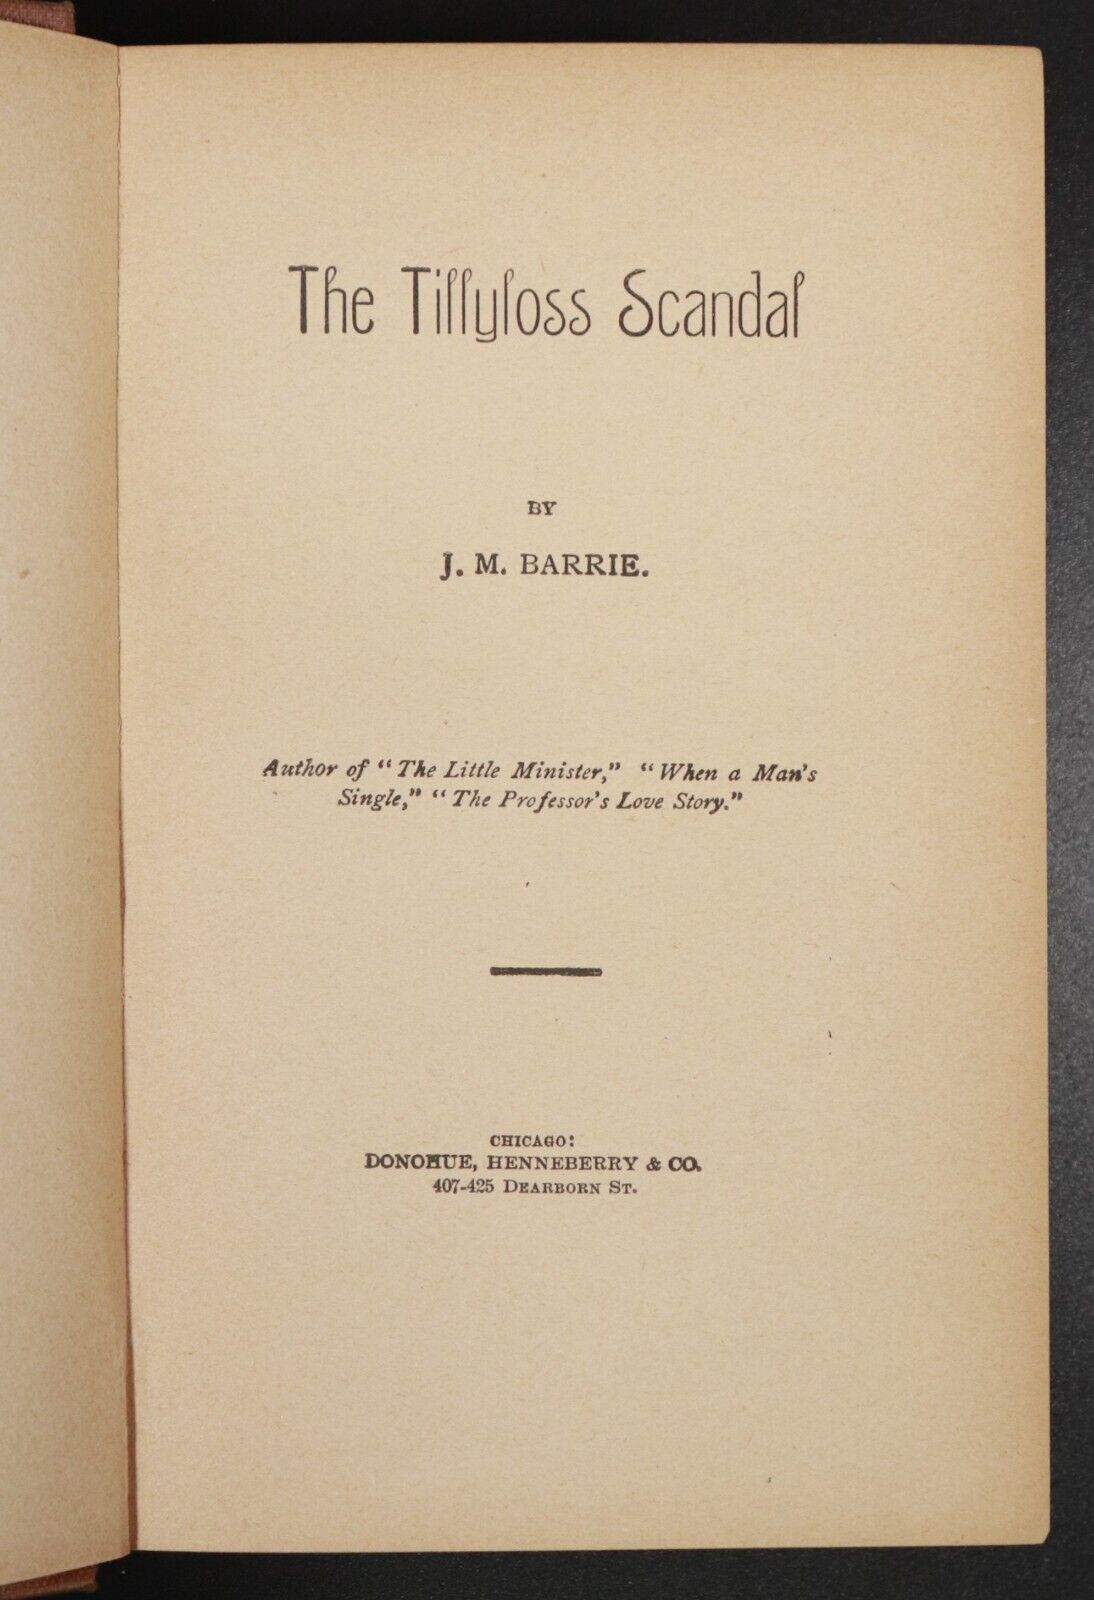 c1893 The Tillyloss Scandal by J.M. Barrie Antique Fiction Book - 0